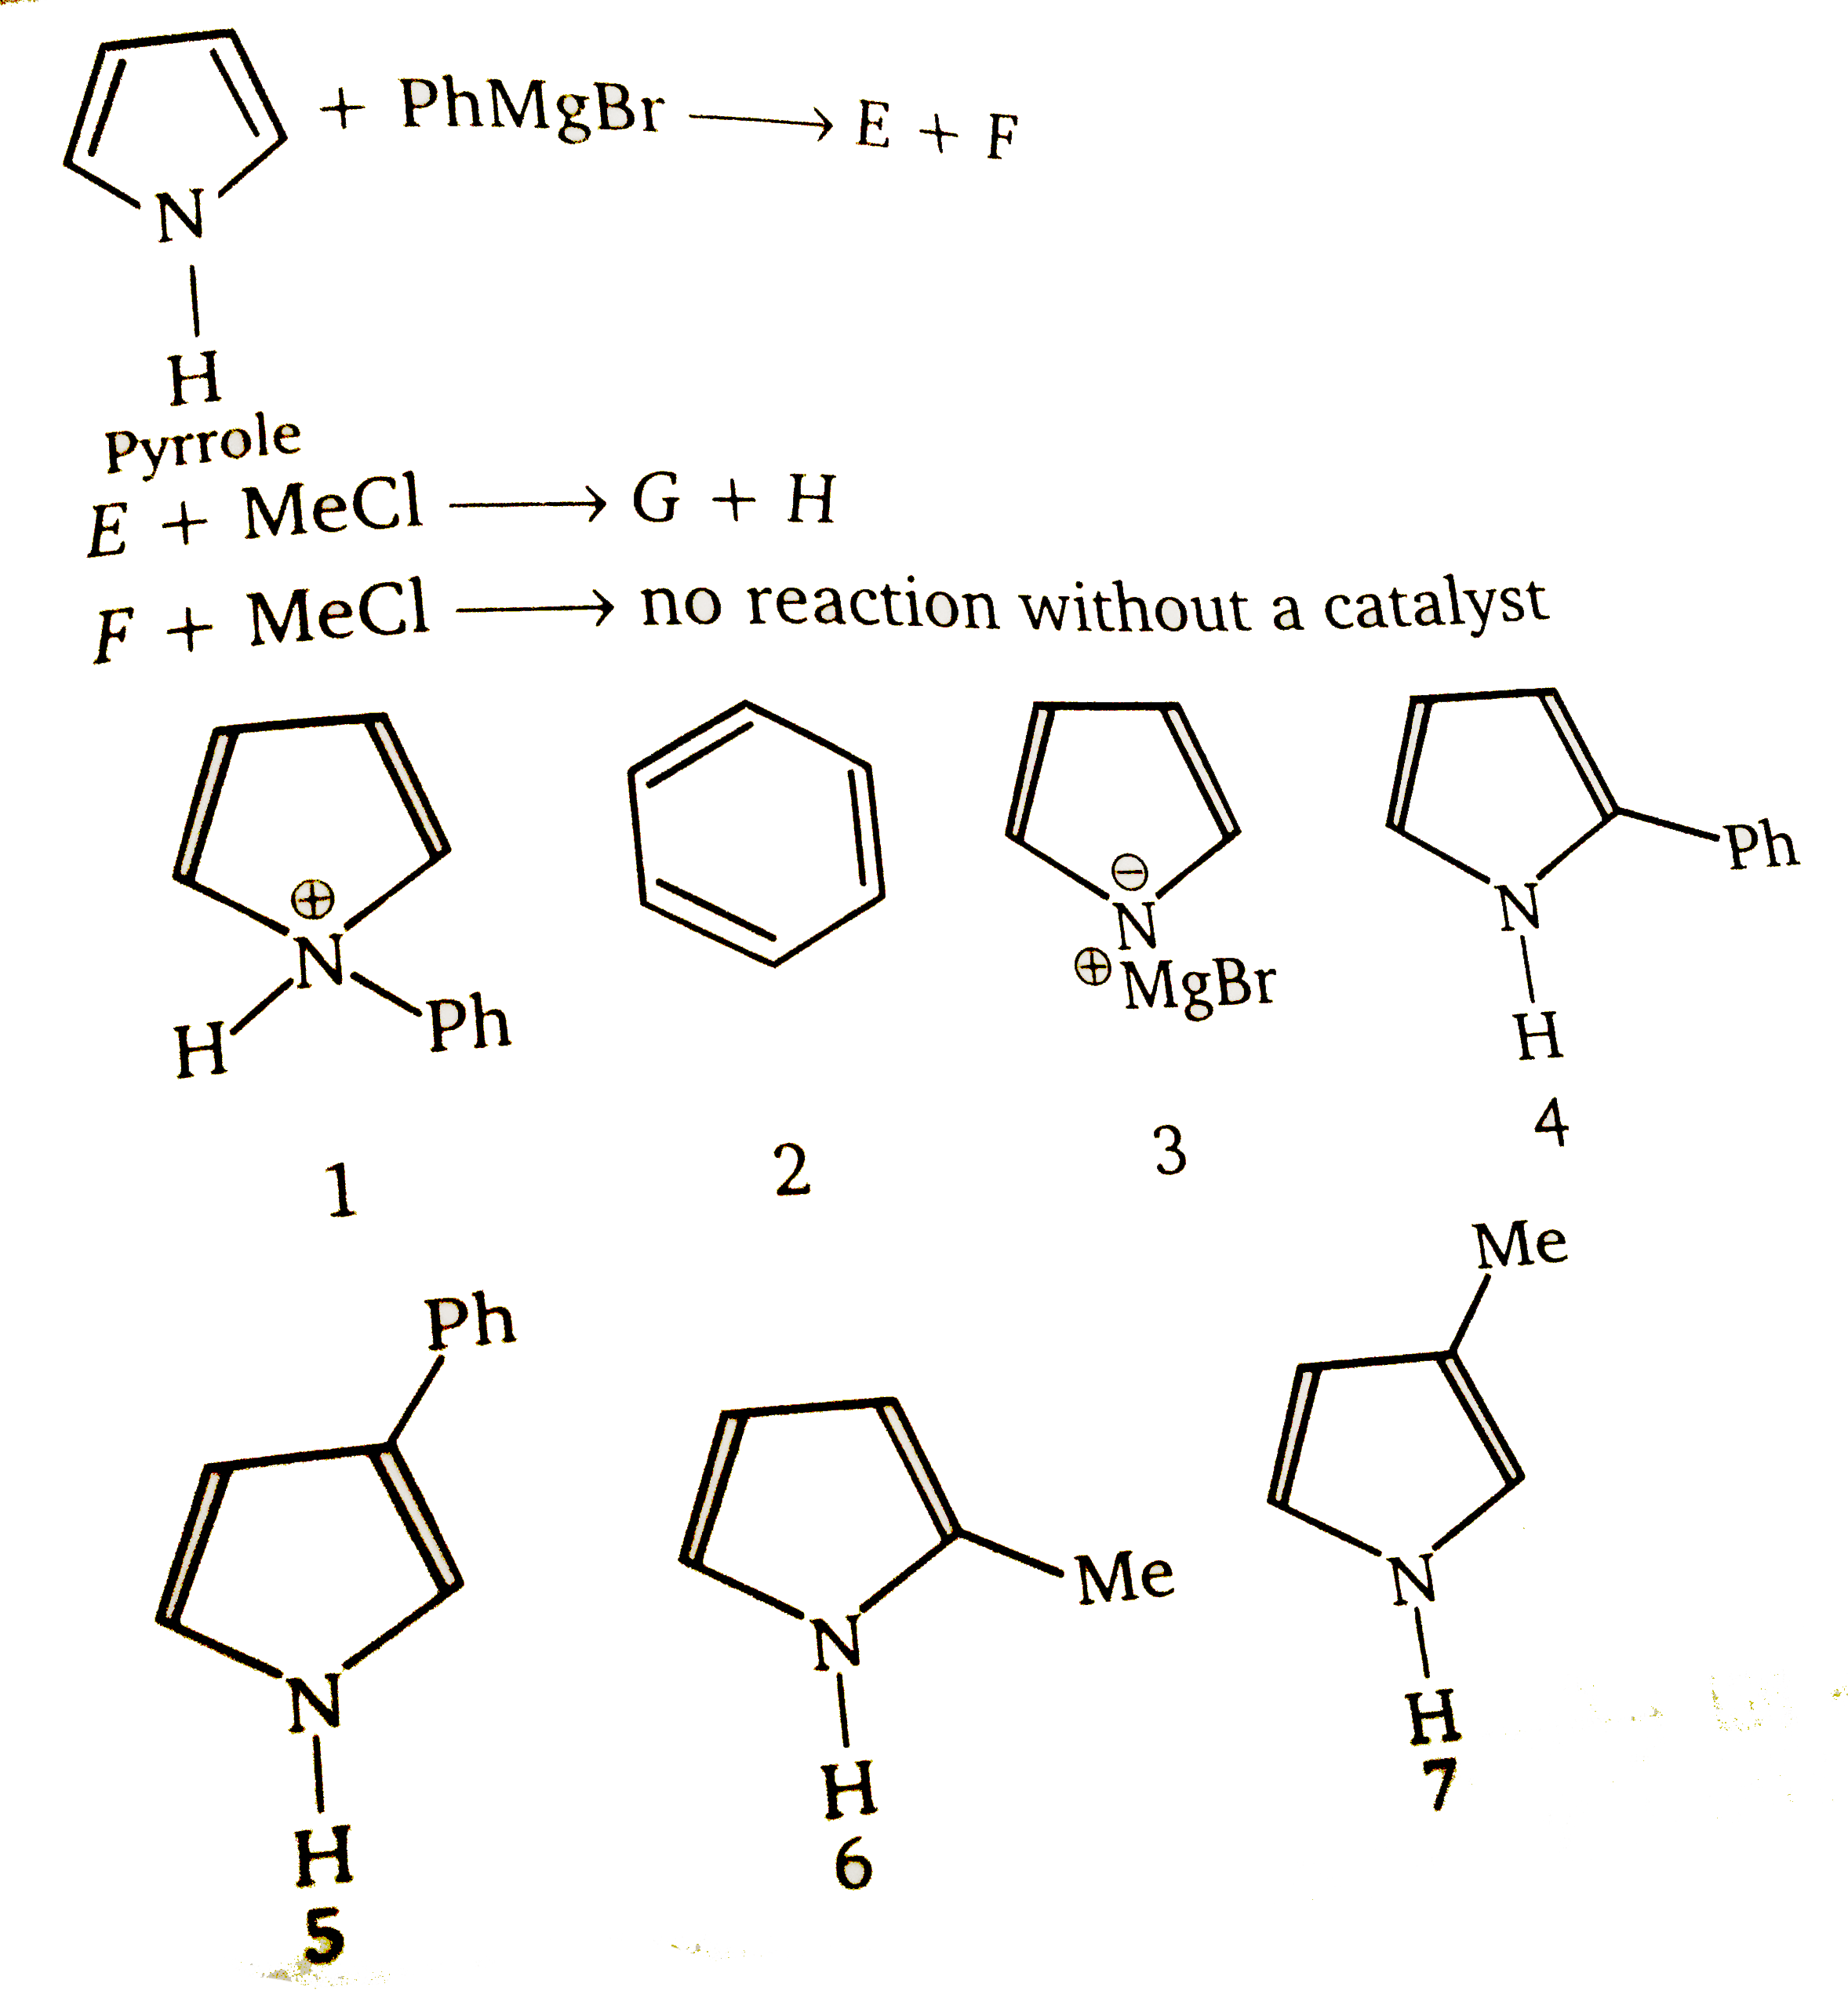 E + MeCl rarr G + H   F + MeCl rarr no reaction without a catalyst      The structure of products E - H, respectively are